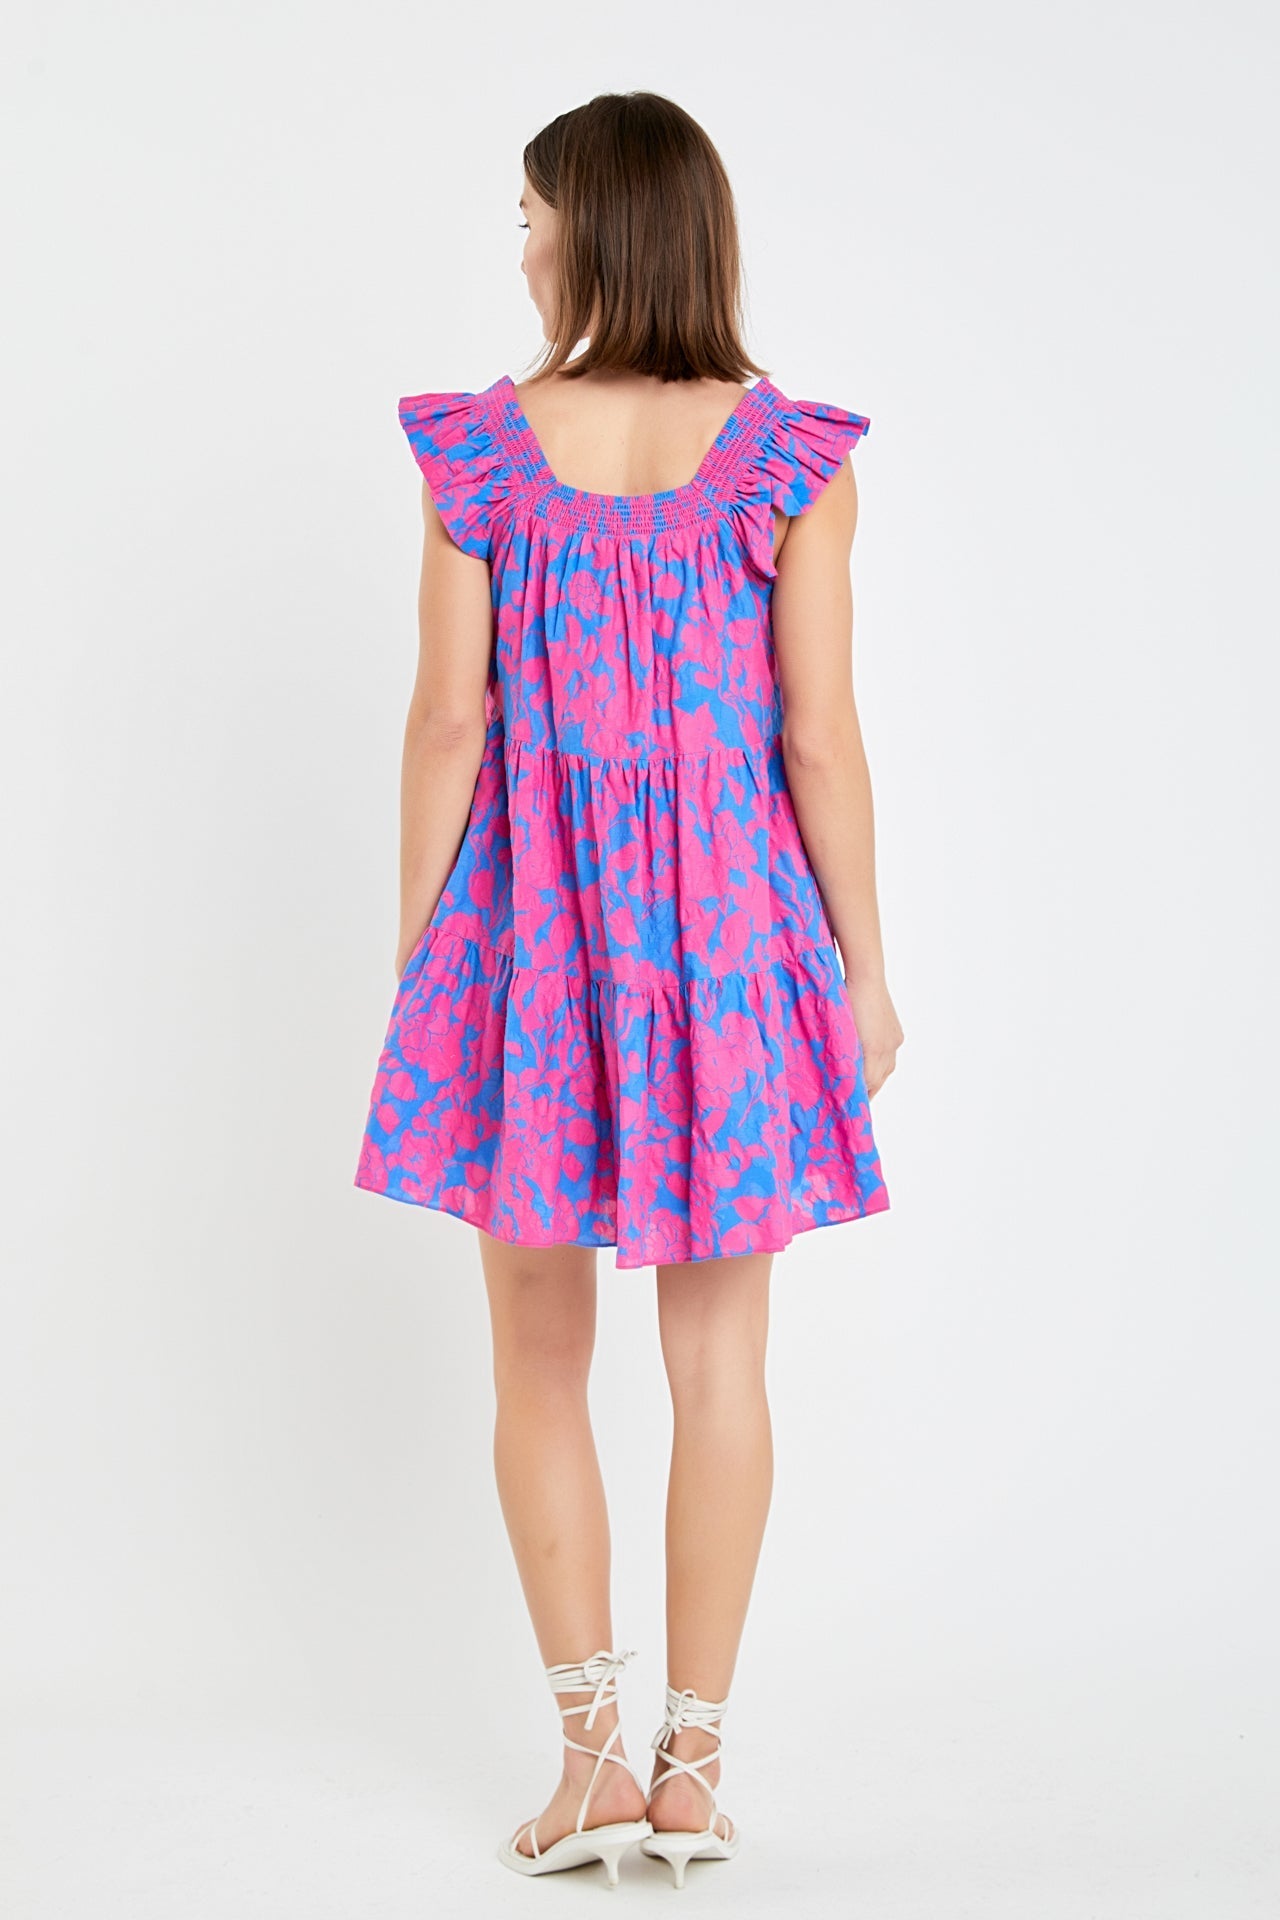 ENGLISH FACTORY - Floral Print Sleeveless Mini Dress - DRESSES available at Objectrare